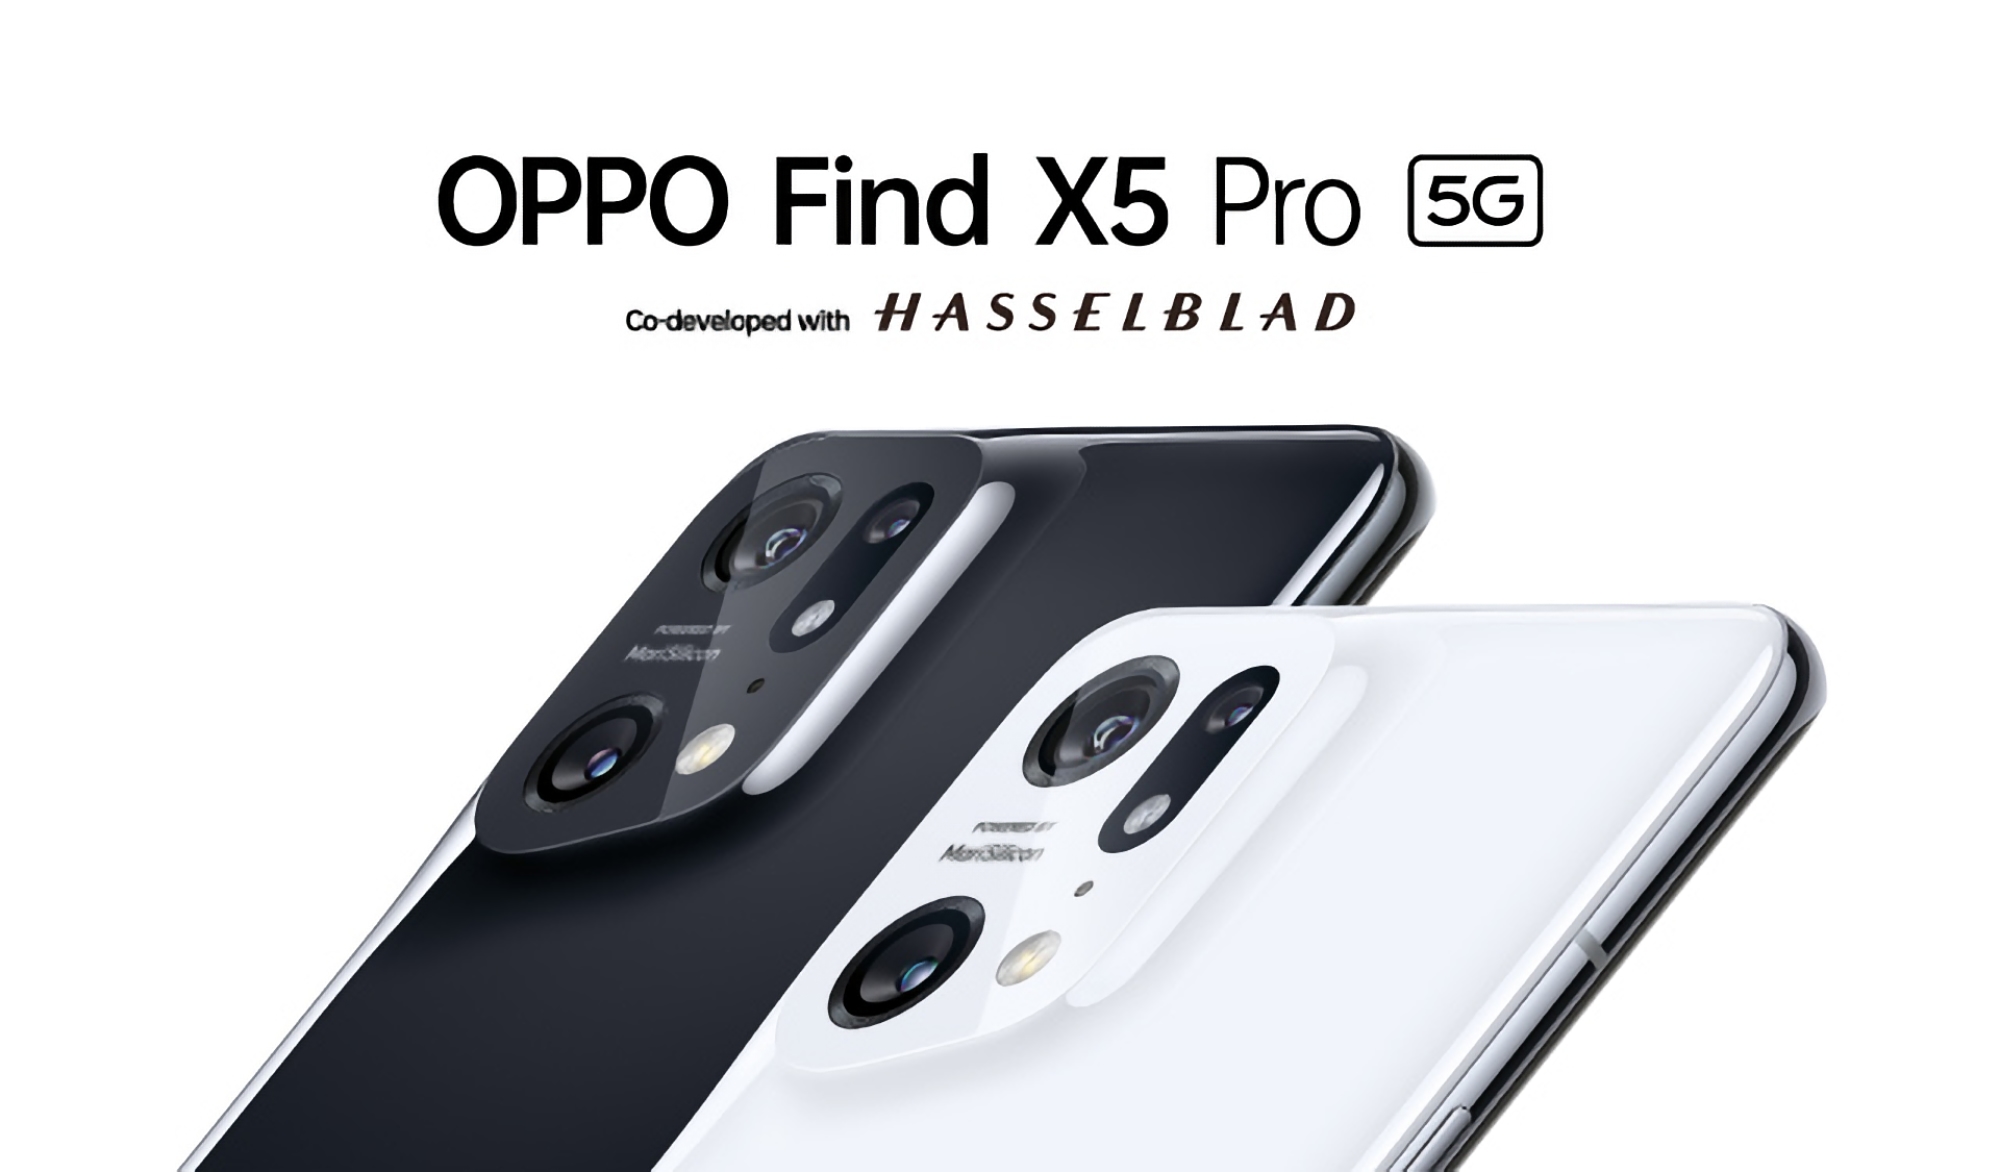 An insider showed press renders of OPPO Find X5, OPPO Find X5 Pro and OPPO Find X5 Lite